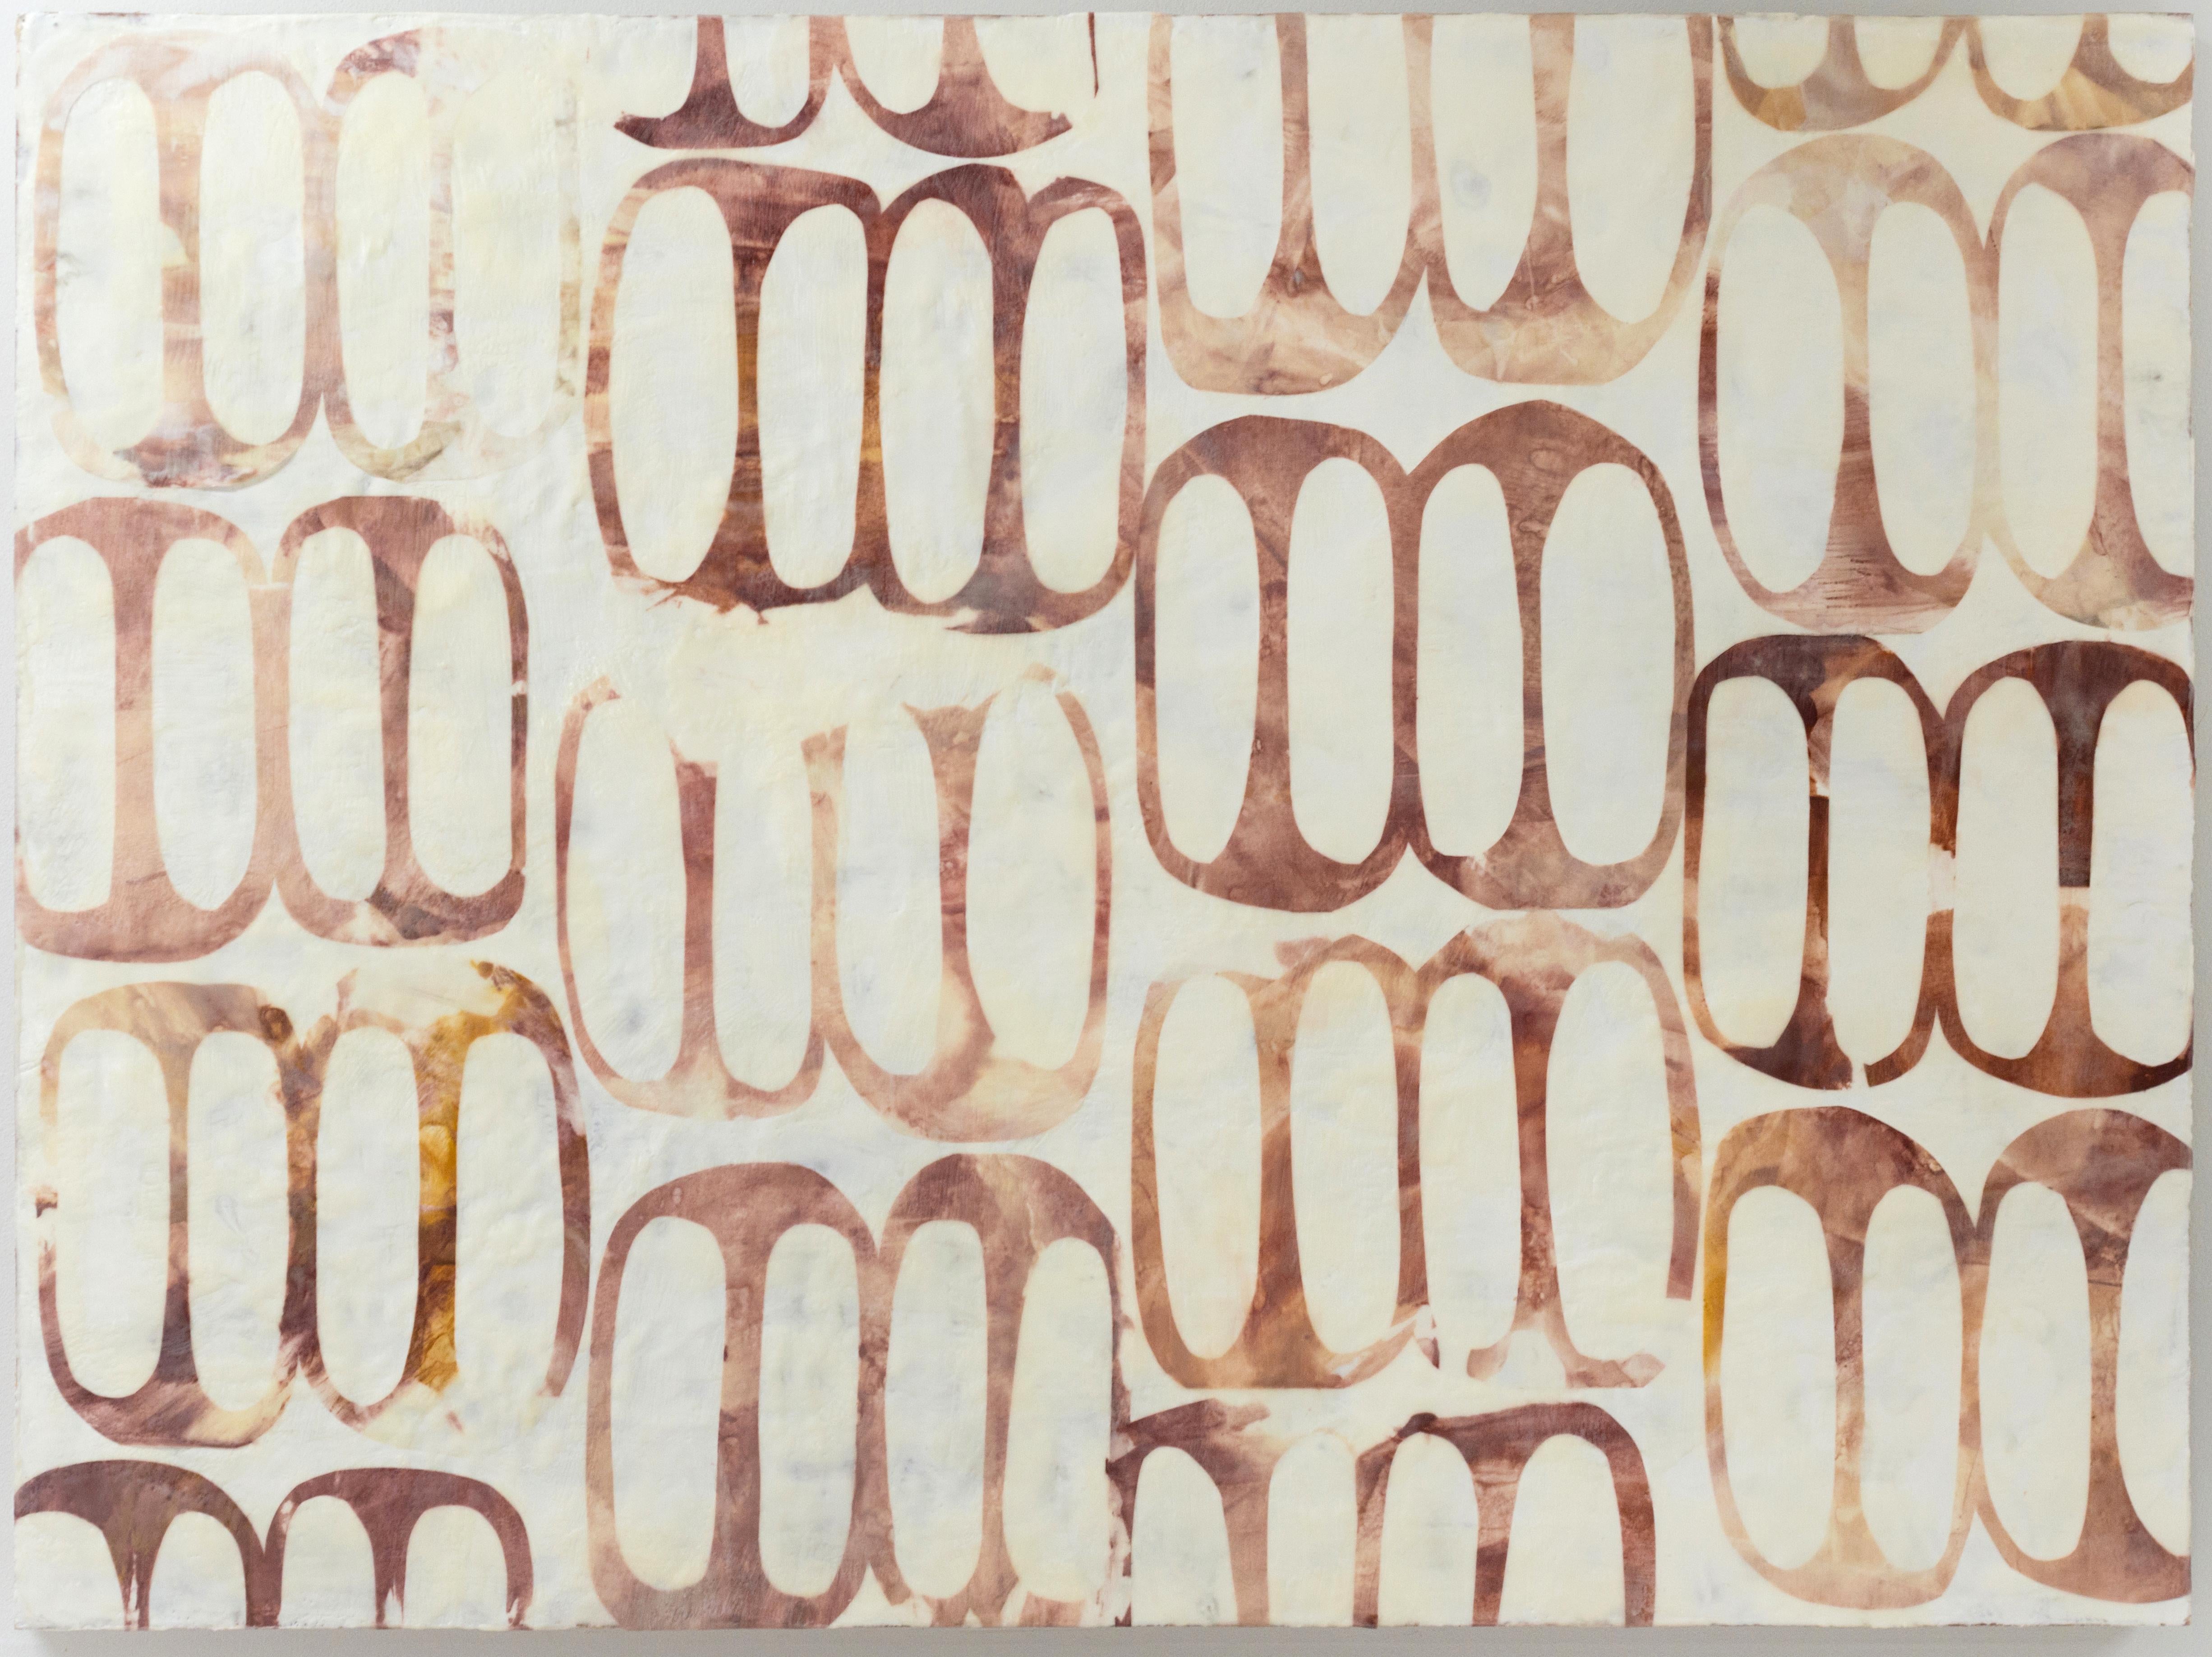 Centuries (Abstract Geometric Encaustic Painting In Patterned Ochre and White) - Mixed Media Art by Alaina Enslen